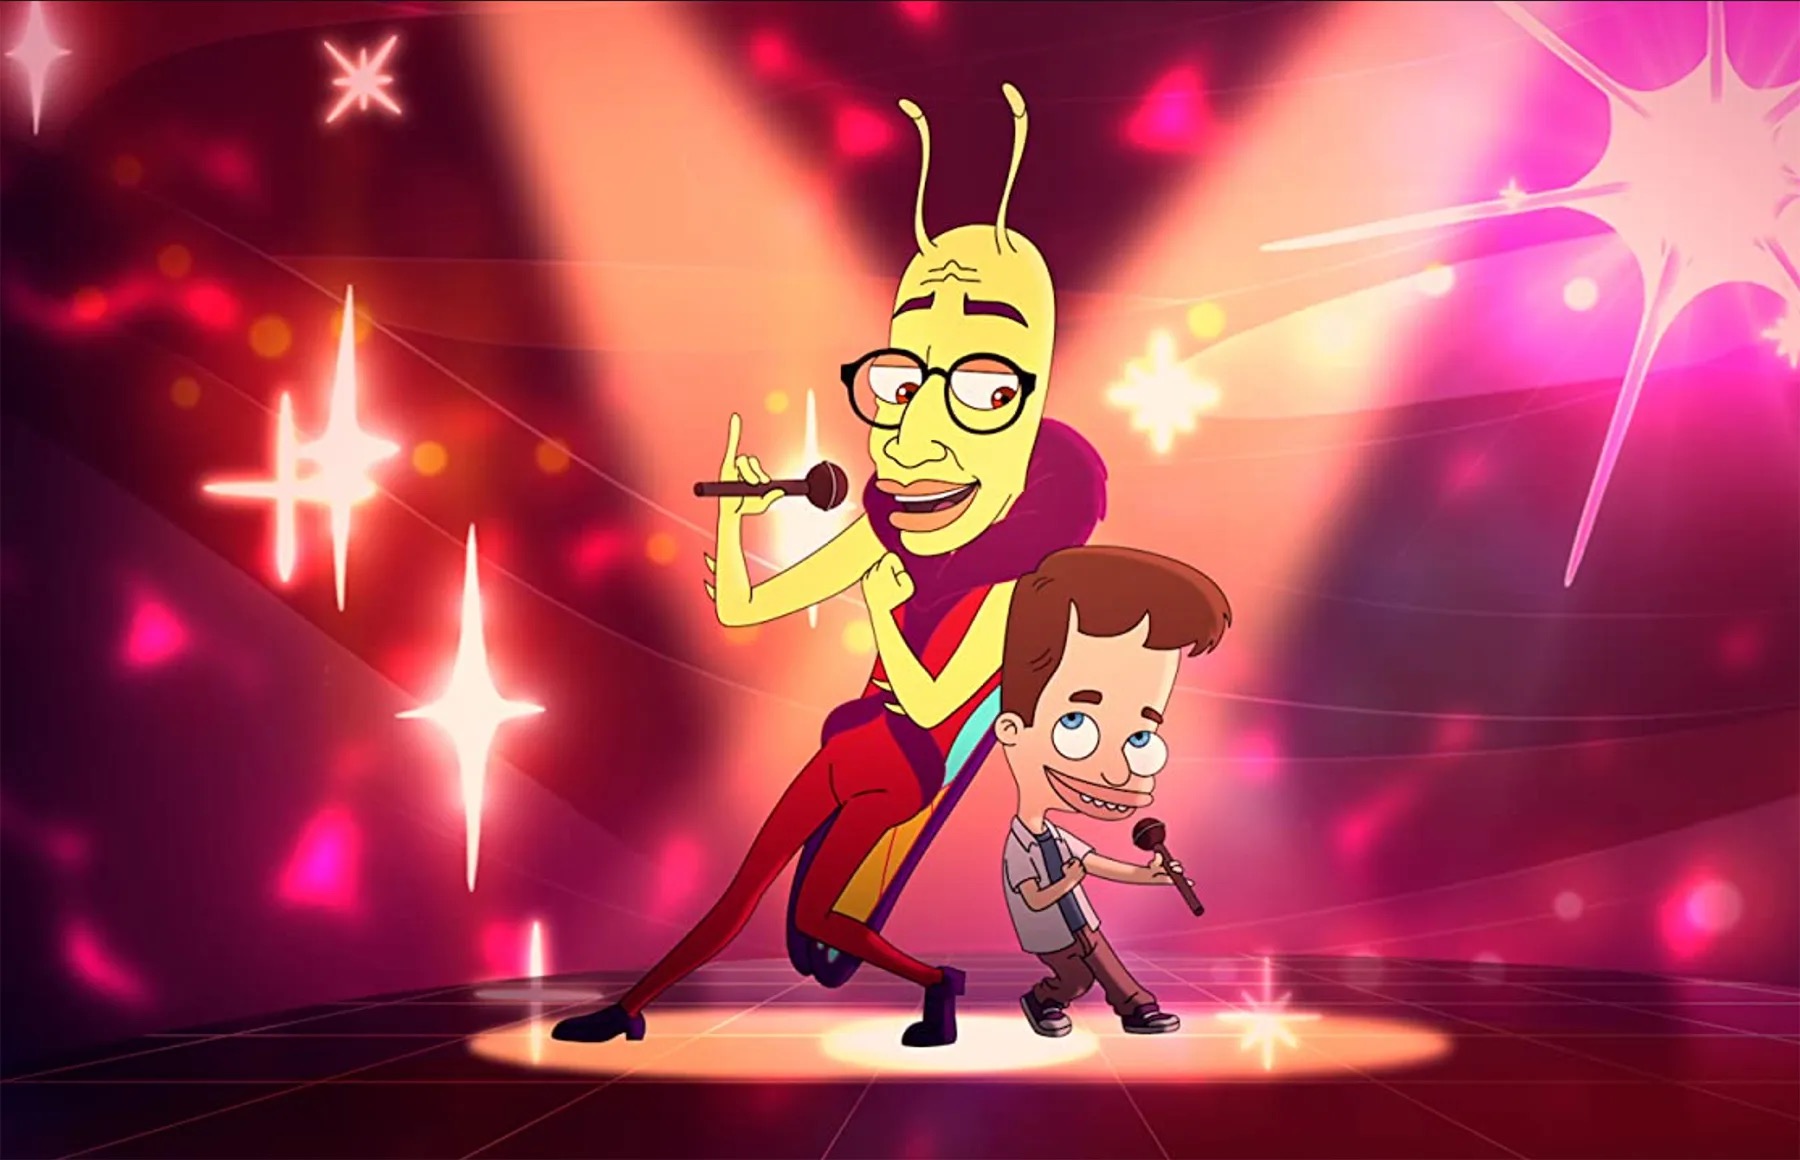 A still from Netflix original "Big Mouth," featuring two characters singing together.